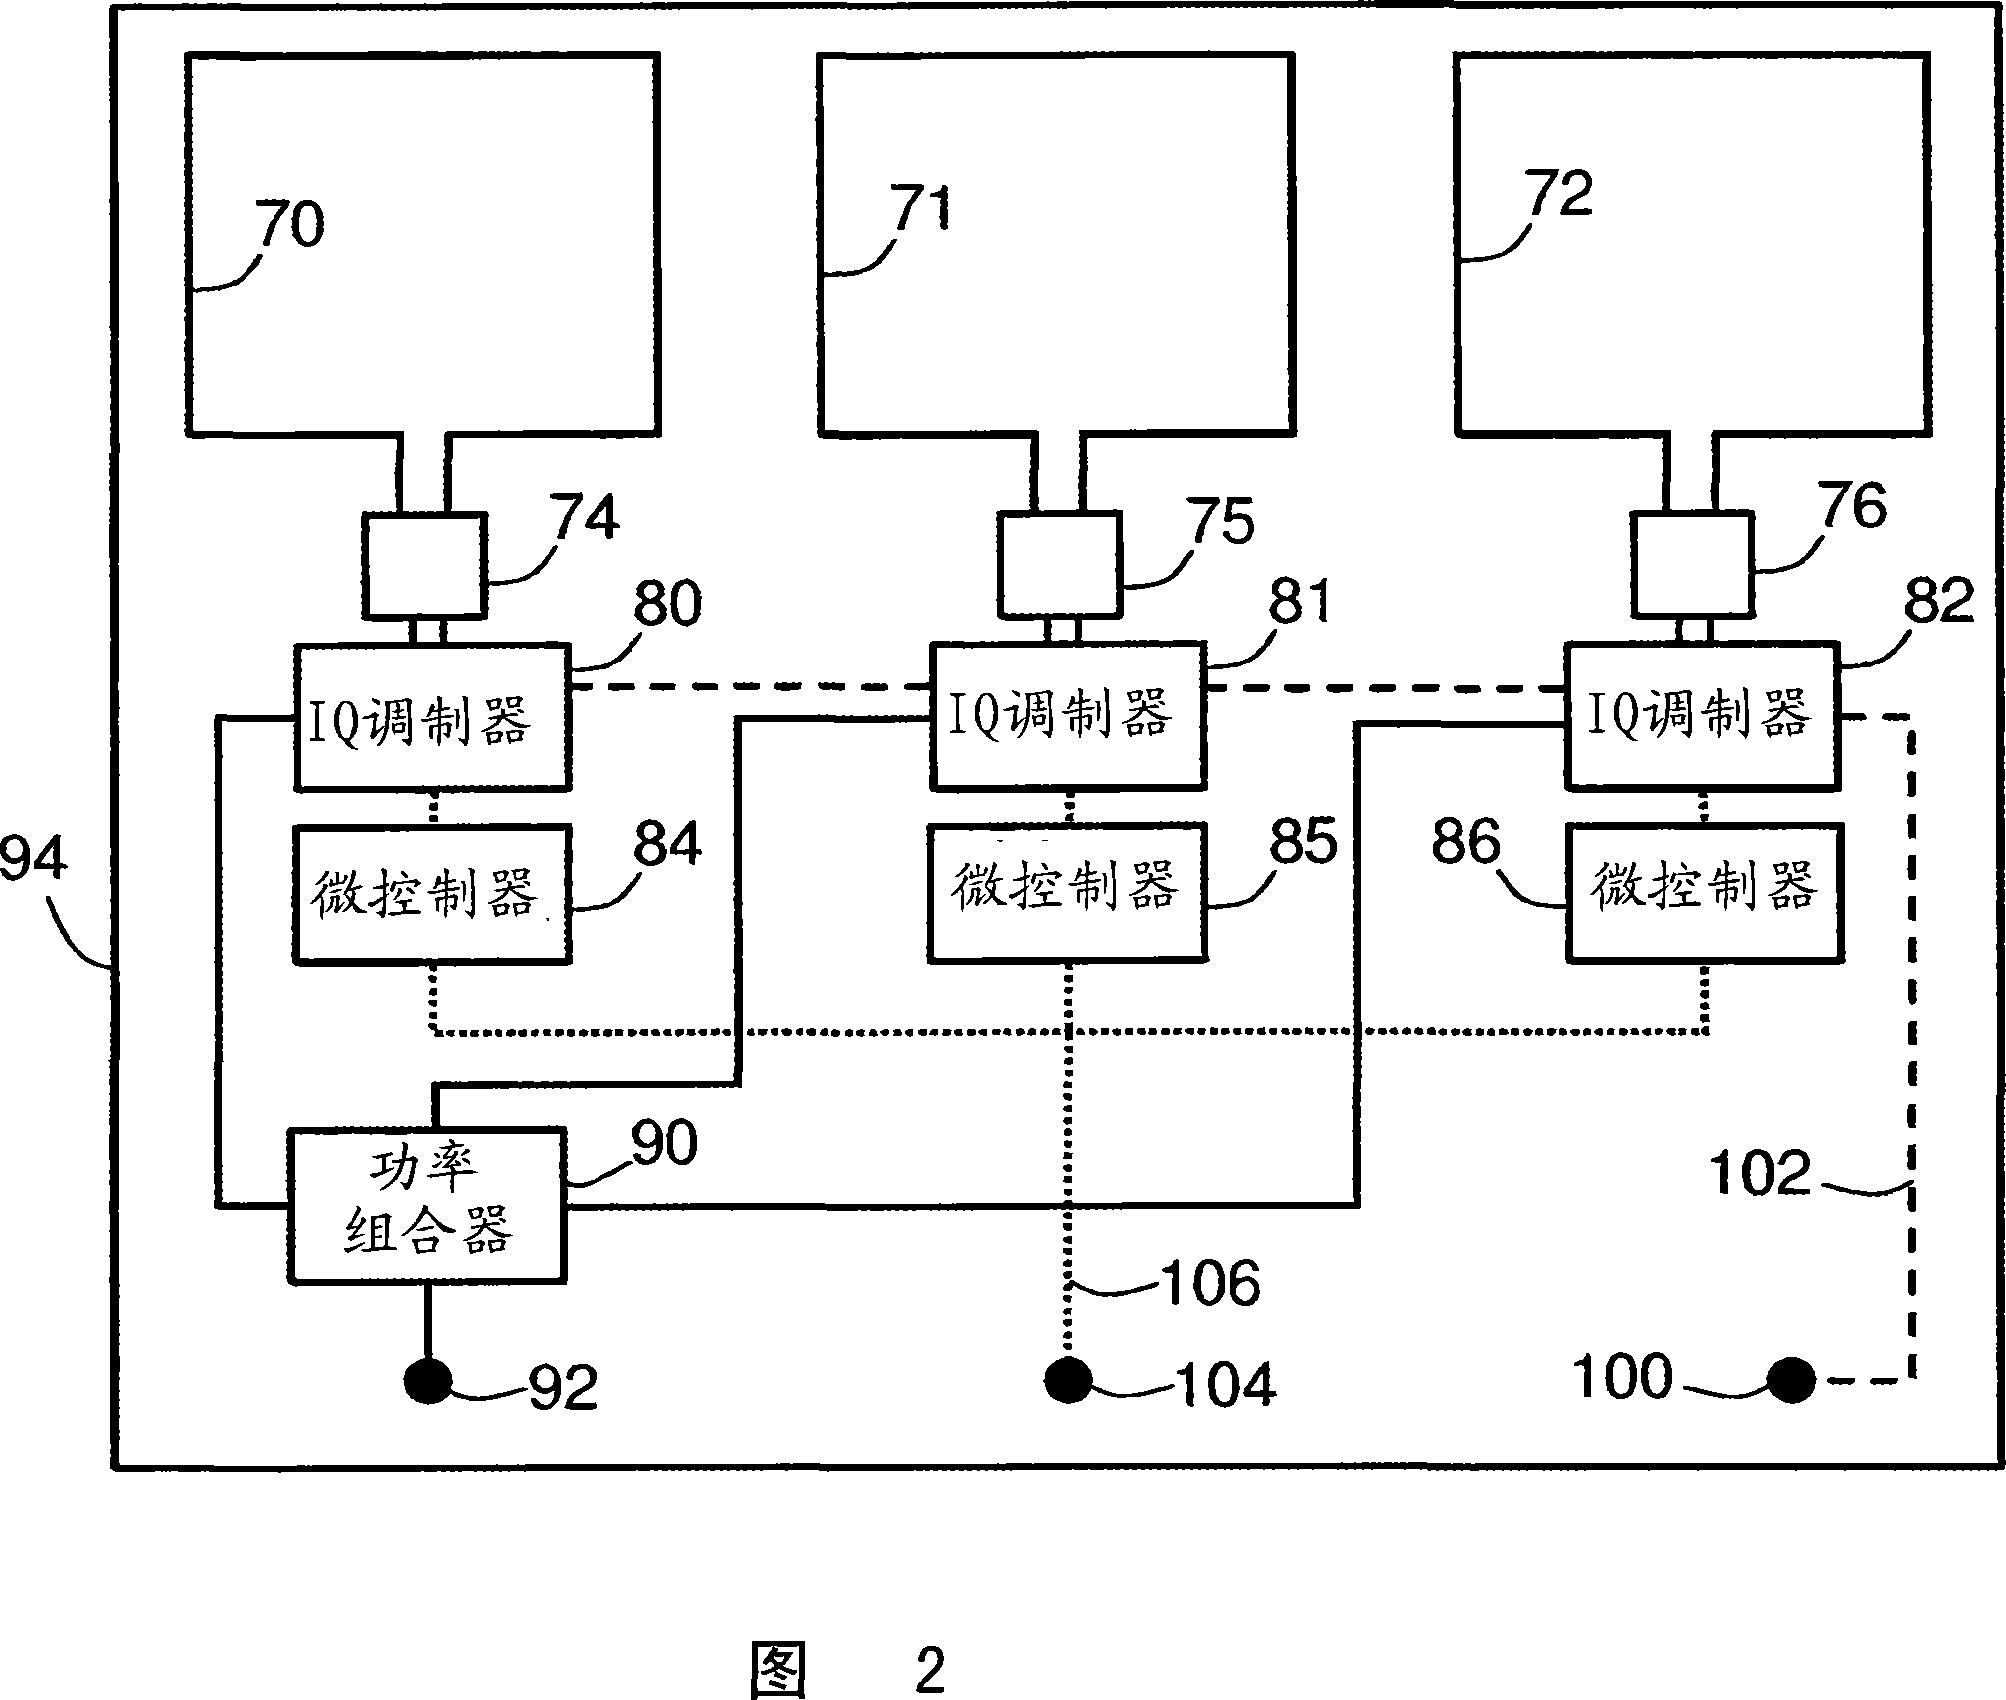 Methods and apparatuses for connecting receive coils in magnetic resonance imaging scanners